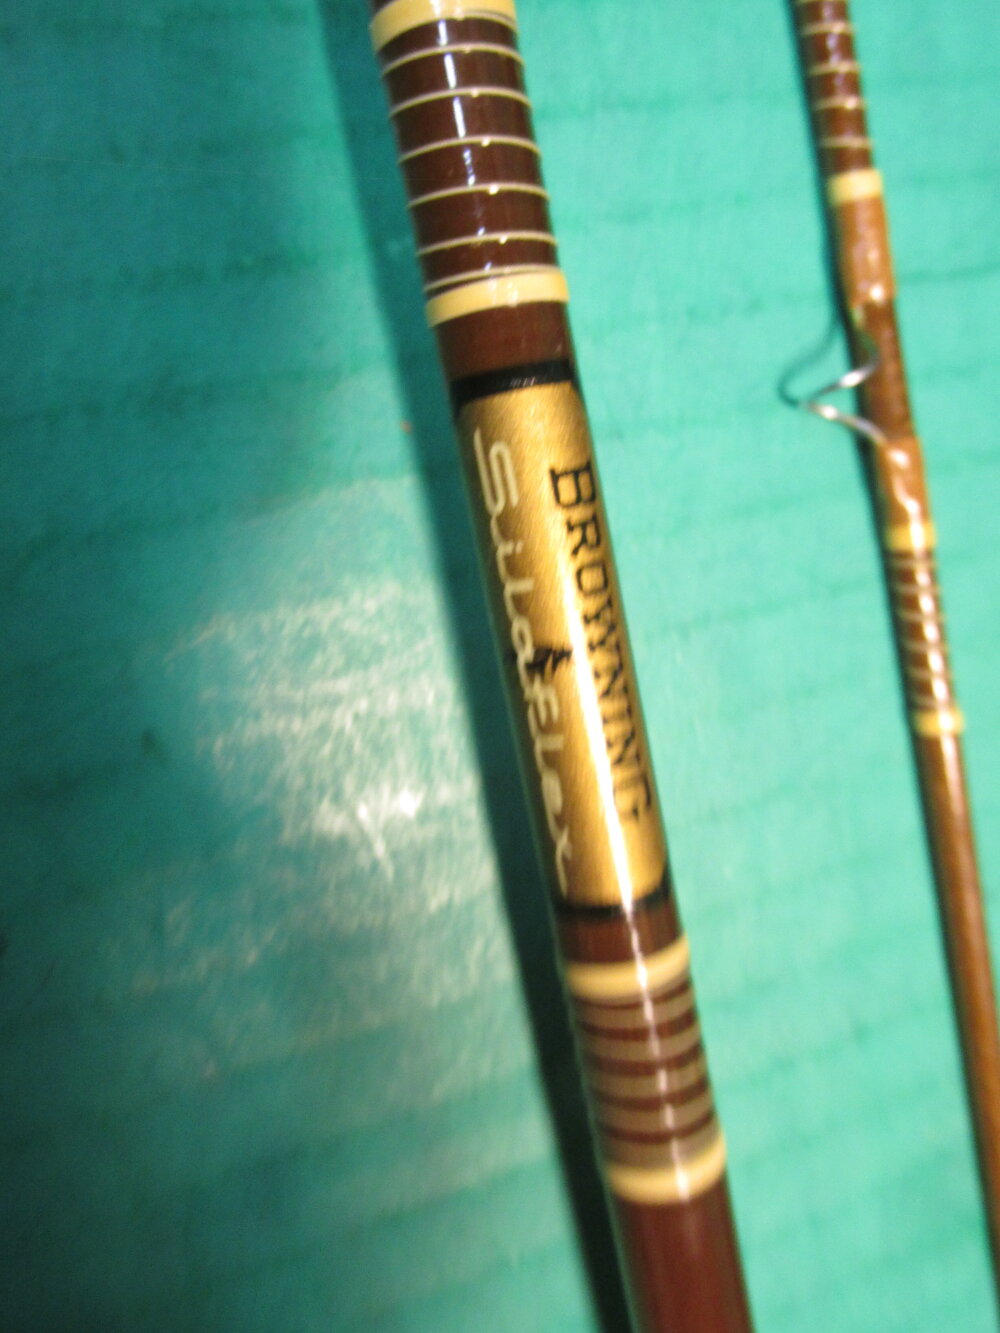 2611 - 10. Browning Sila Flex — R.W. Summers Bamboo Fly Rods Company